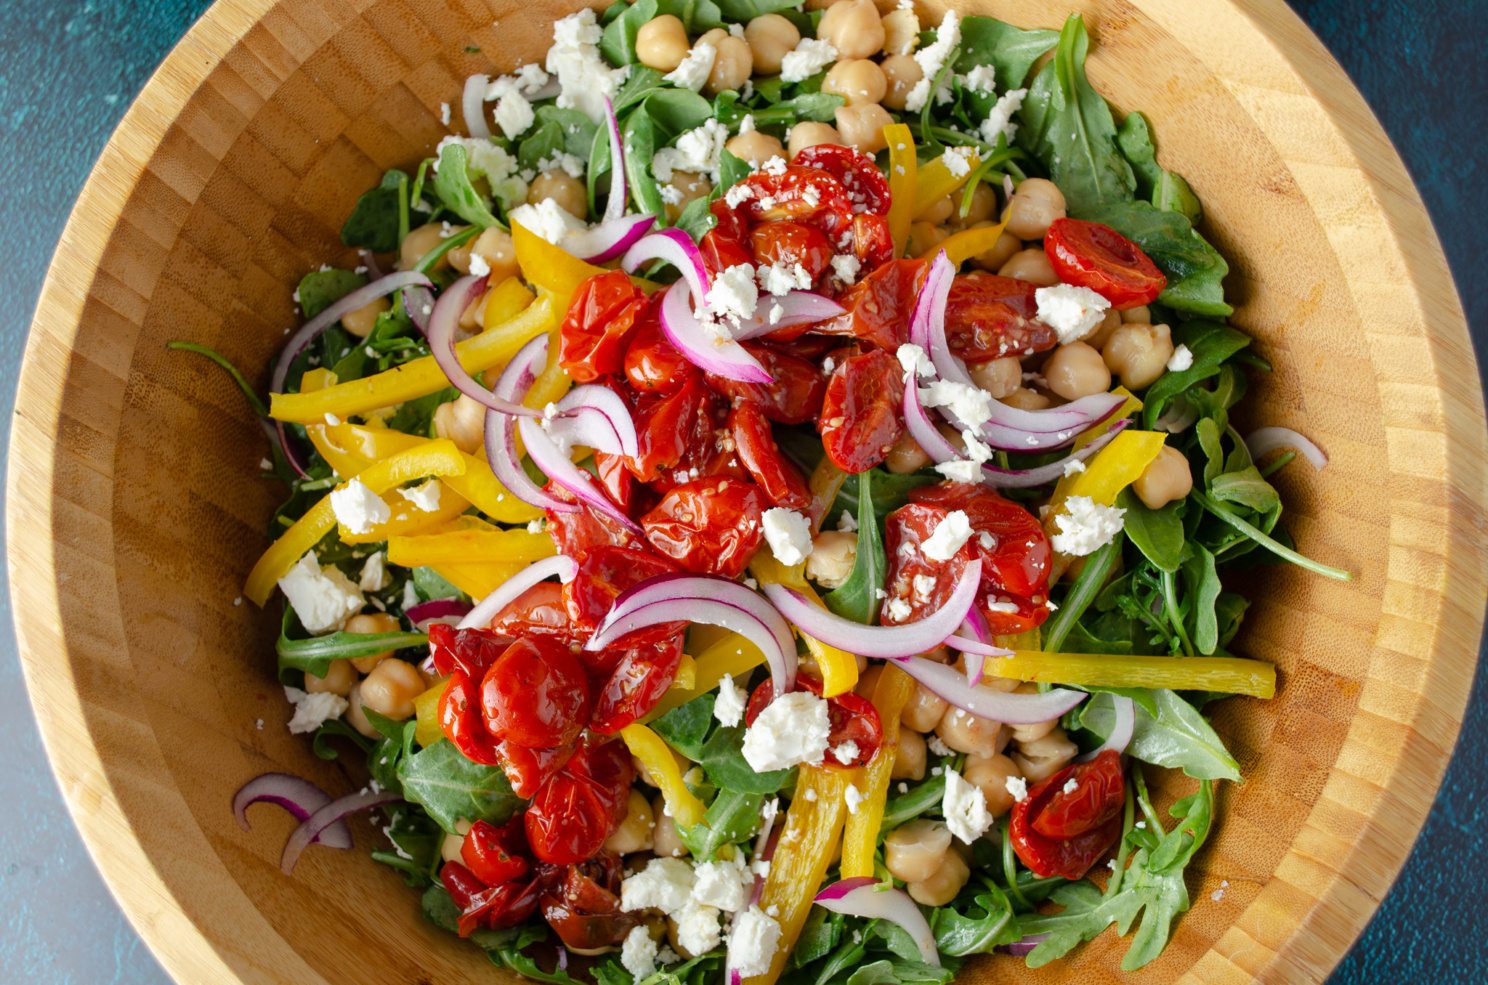 A salad made with arugula, bell peppers, chickpeas, red onion, and roasted cherry tomato confit